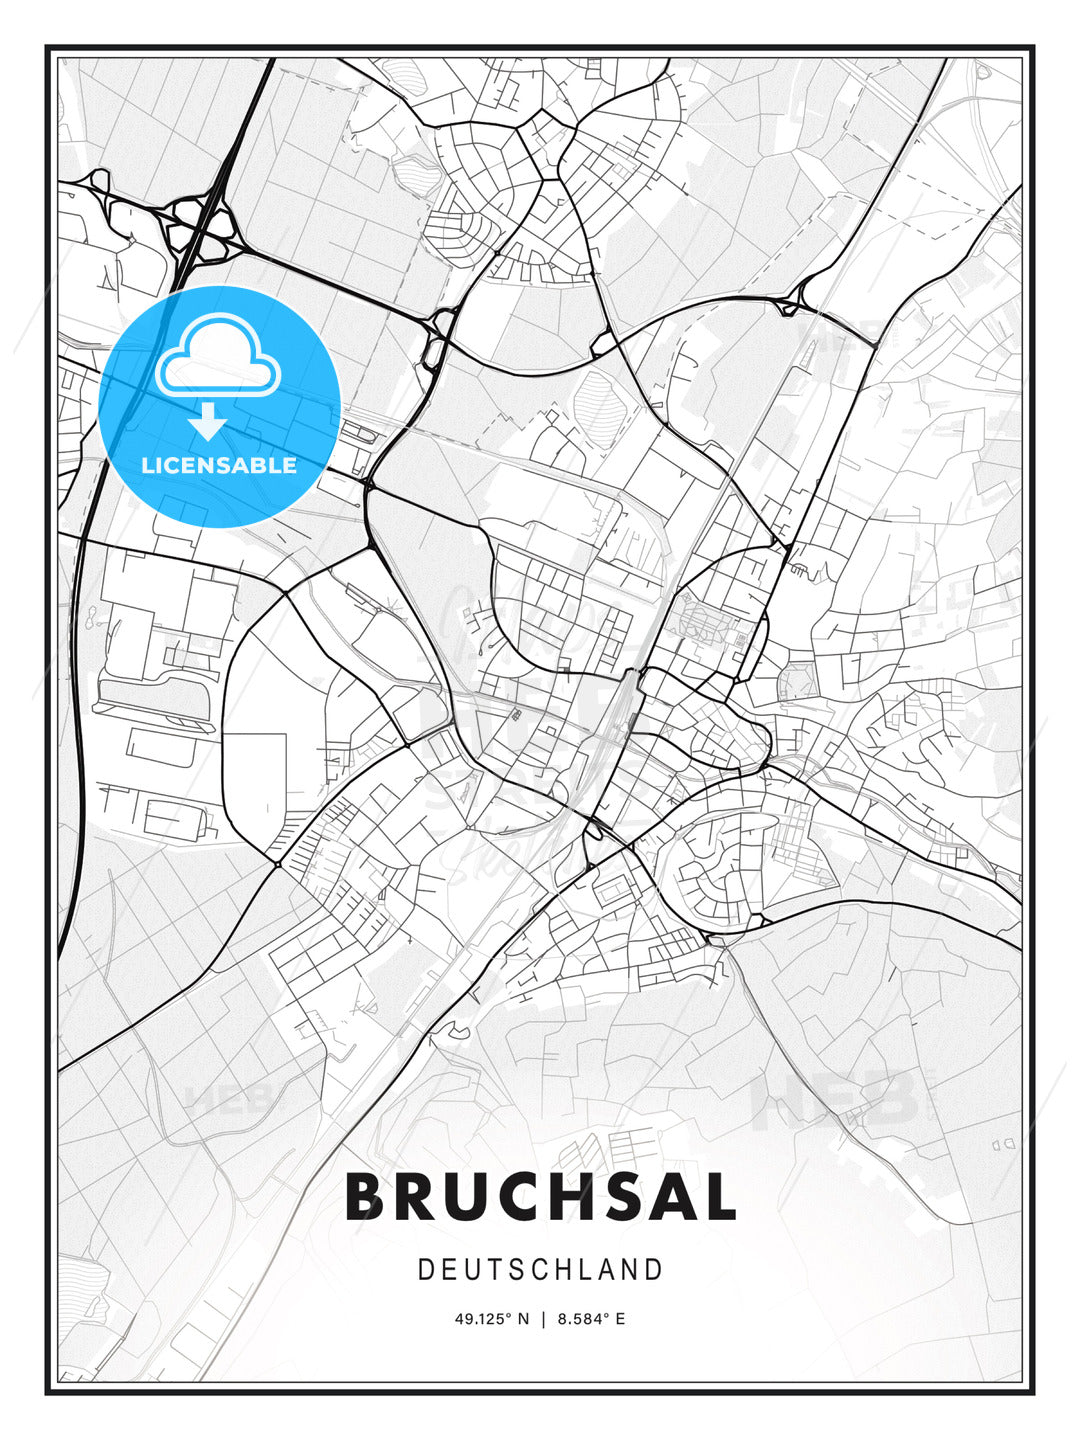 Bruchsal, Germany, Modern Print Template in Various Formats - HEBSTREITS Sketches